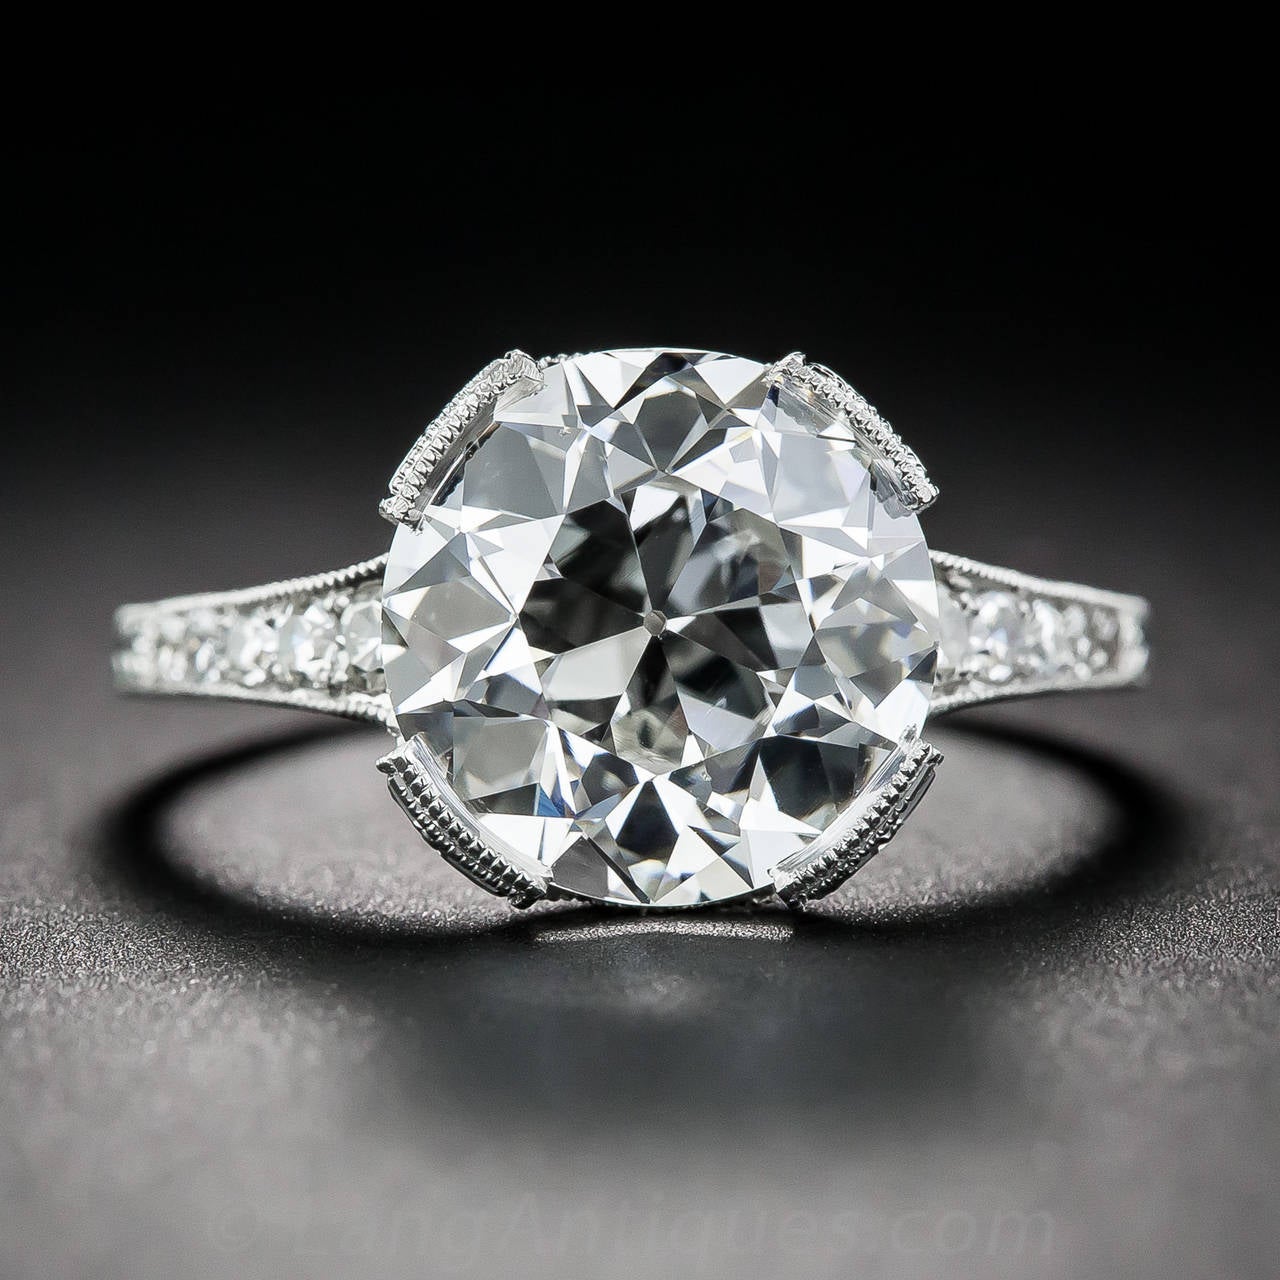 A glorious and glistening European-cut diamond, weighing just five points shy of 4 carats, sparkles mightily from within an elegantly restrained platinum and and diamond setting, newly and expertly hand-fabricated in enduring early-twentieth century